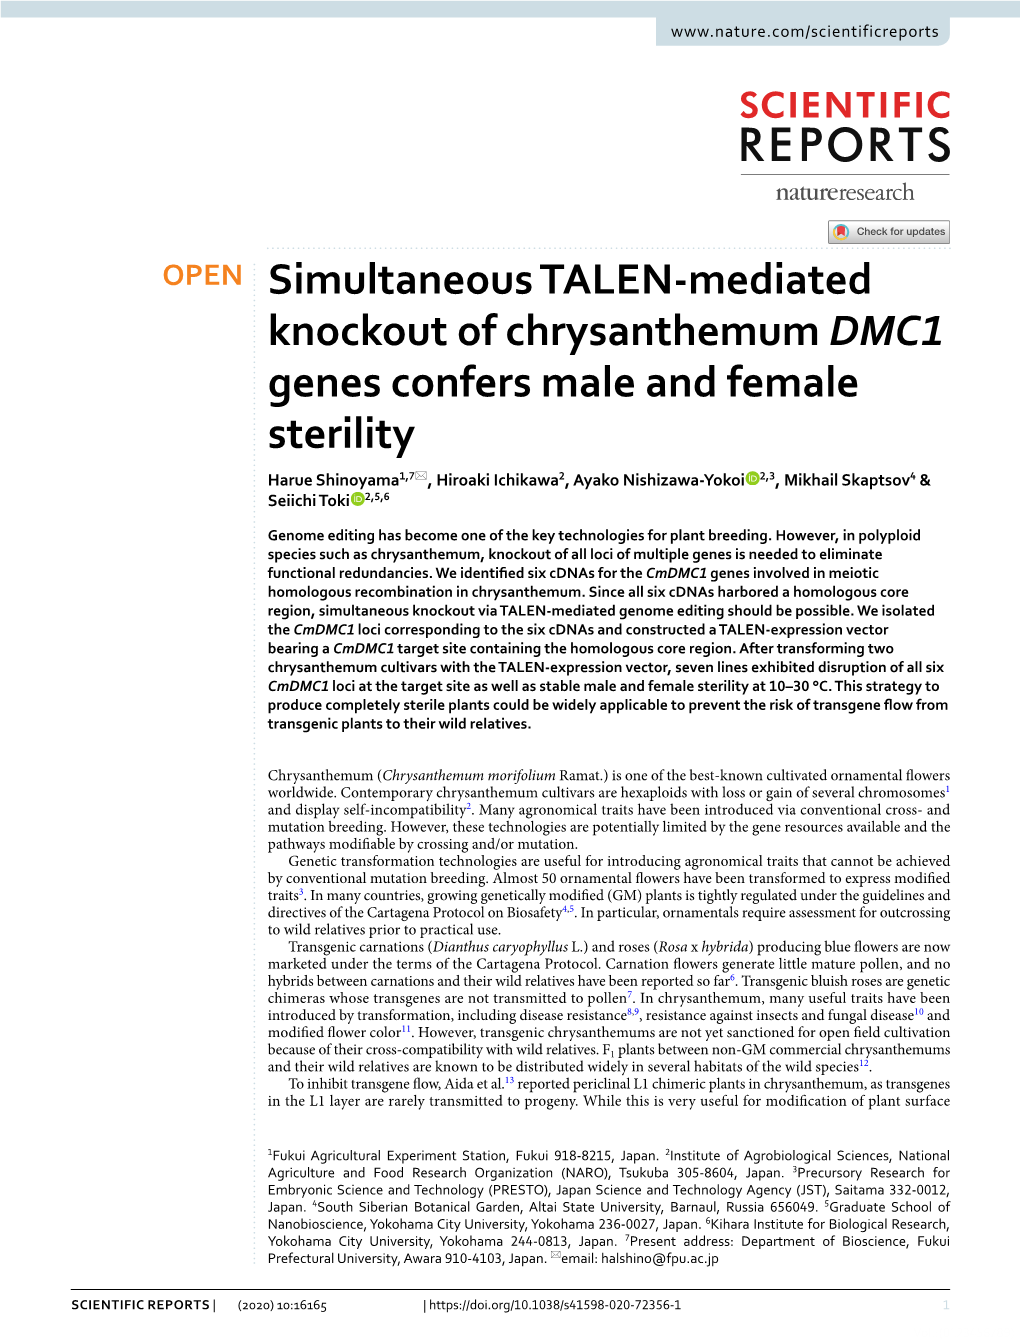 Simultaneous TALEN-Mediated Knockout of Chrysanthemum DMC1 Genes Confers Male and Female Sterility